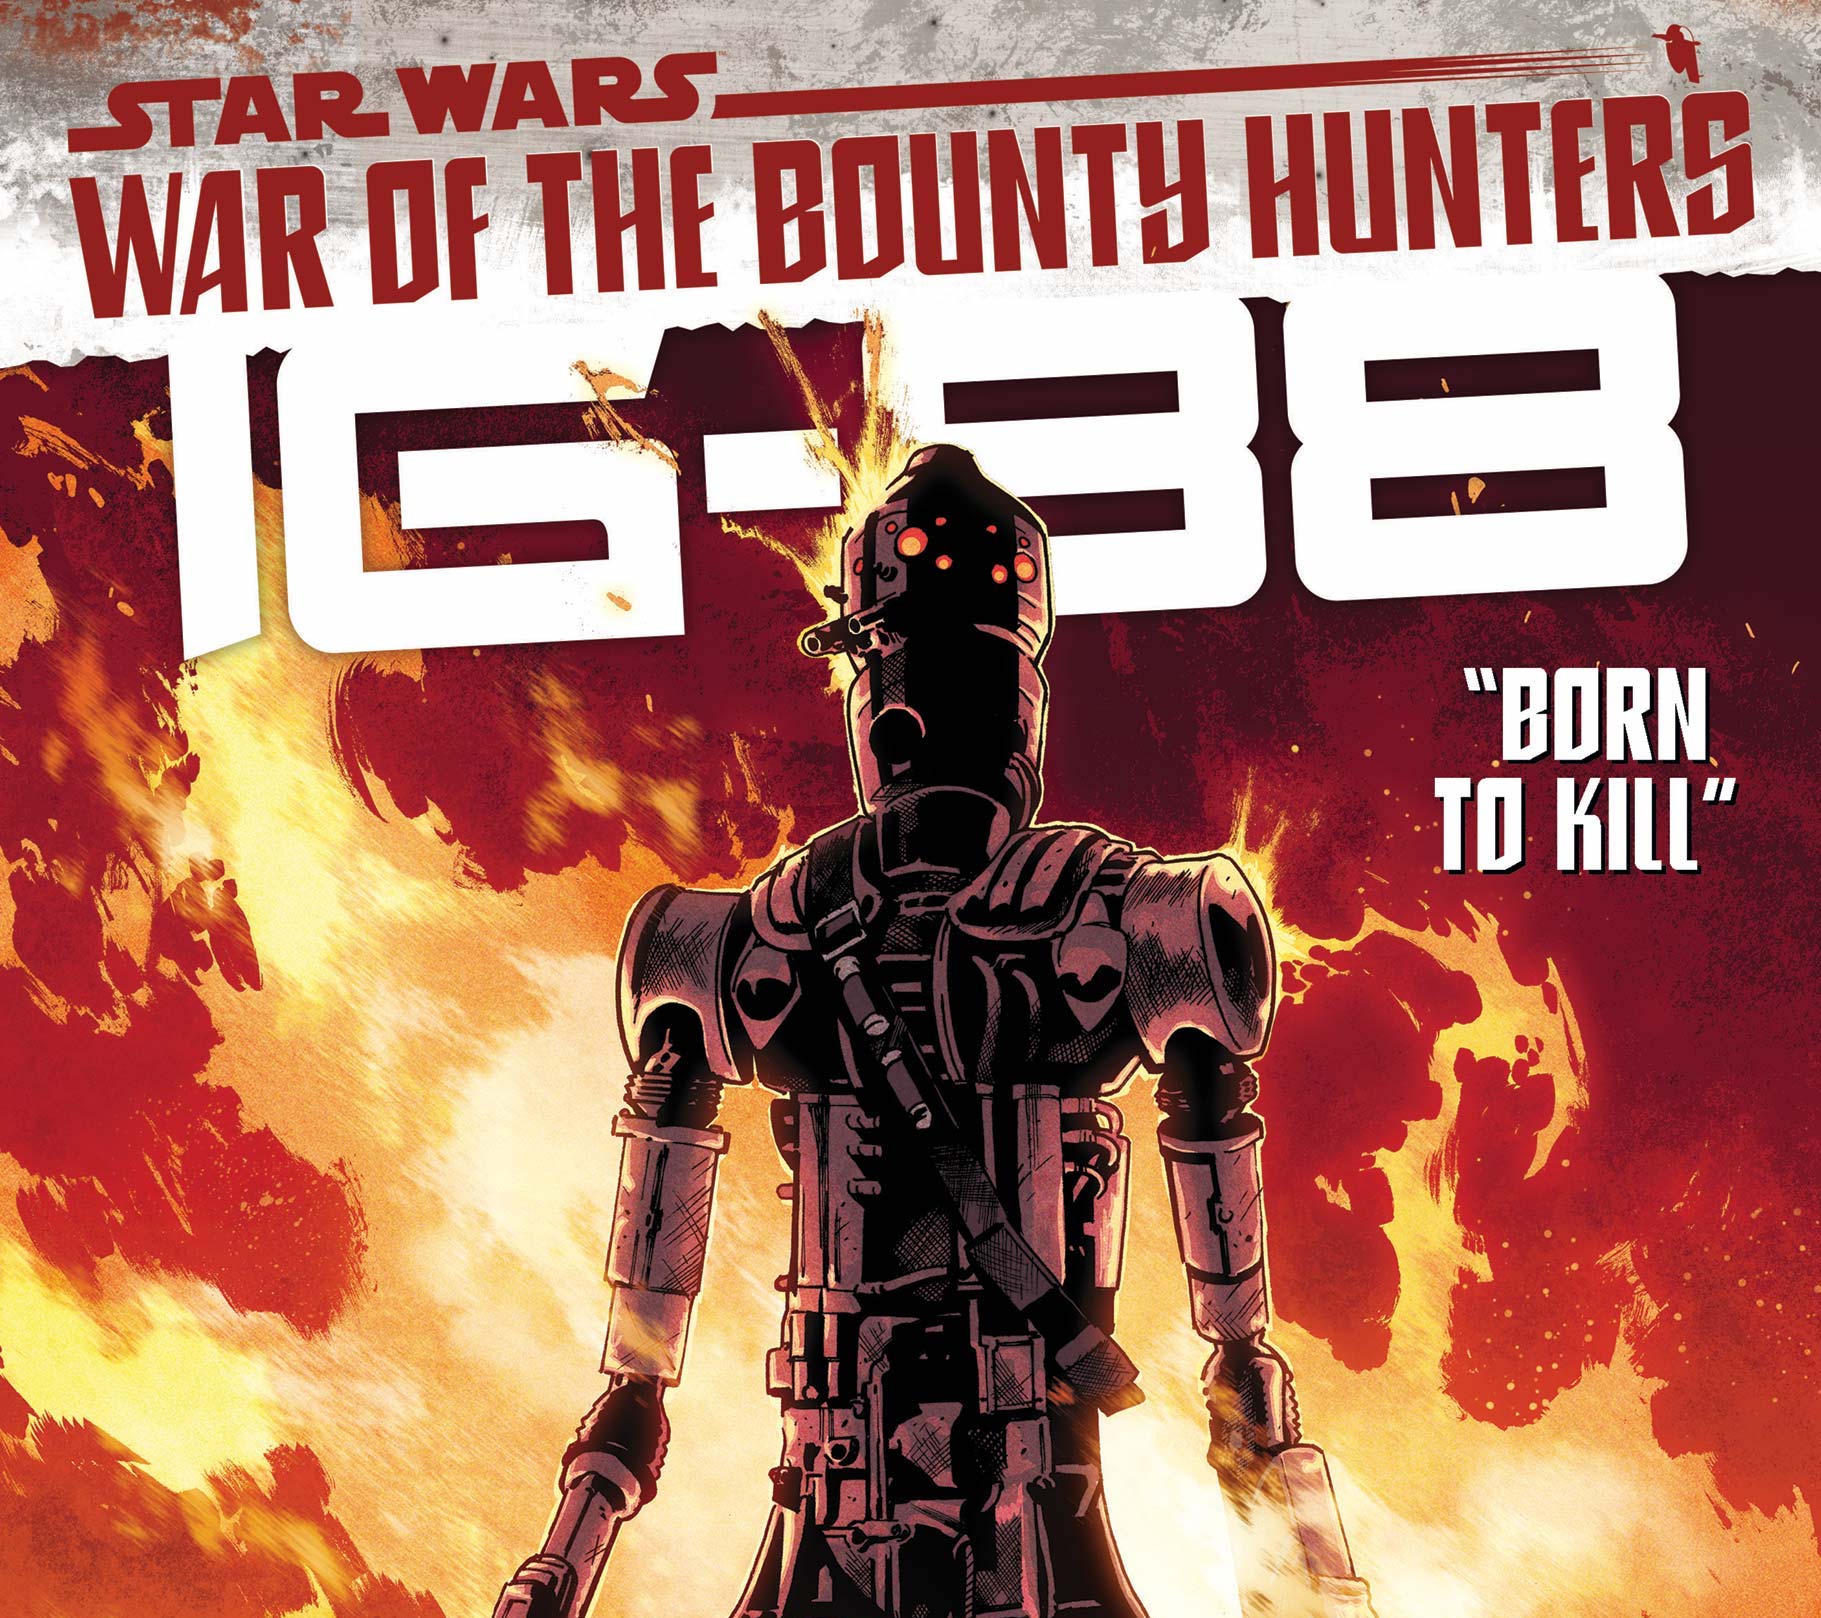 'Star Wars: War of the Bounty Hunters: IG-88' #1 is about a droid with ambition